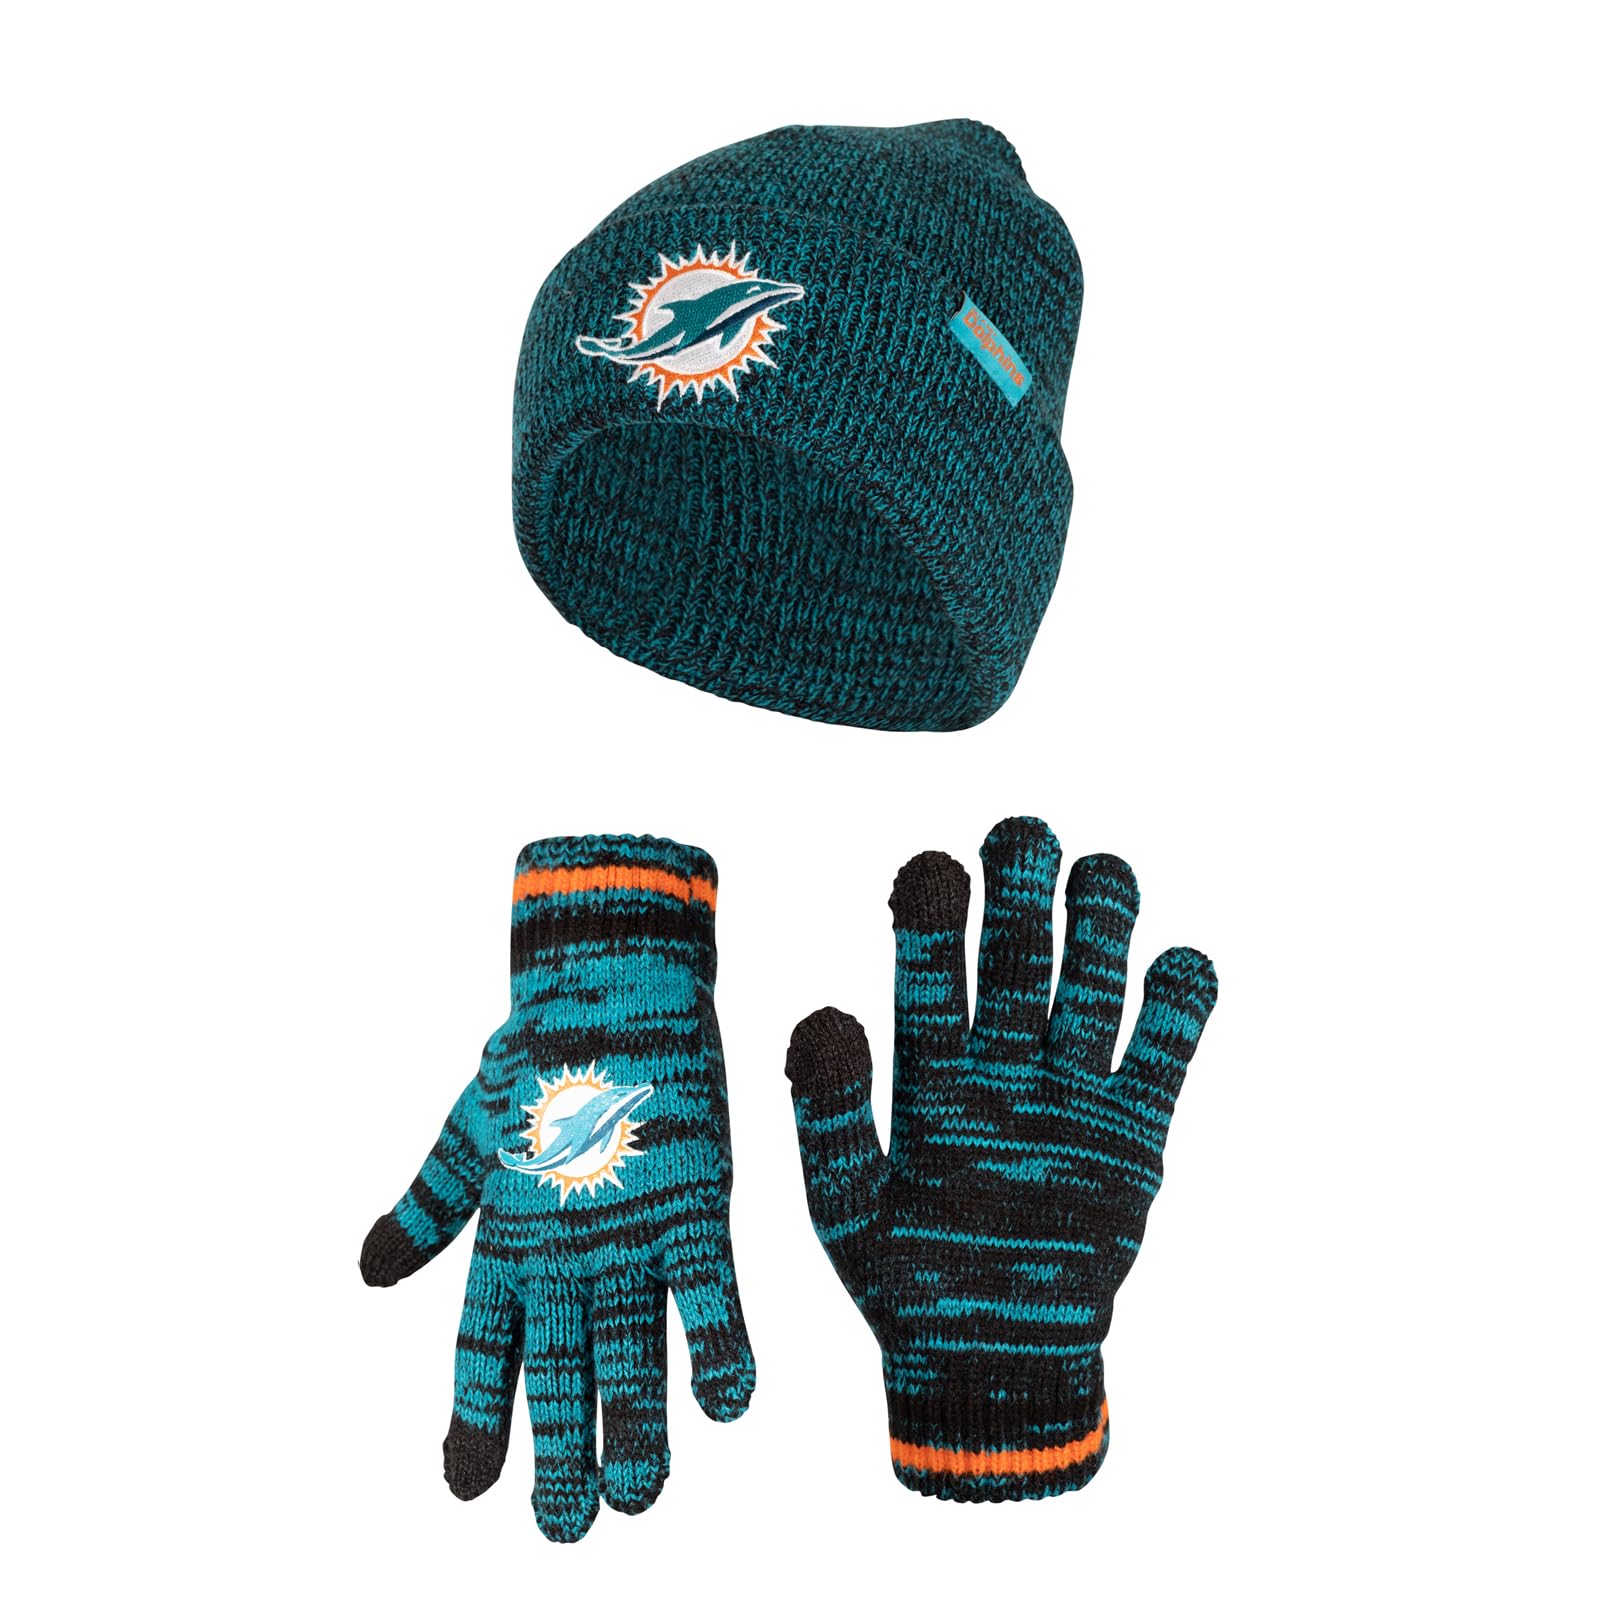 Ultra Game NFL Miami Dolphins Youth Super Soft Marled Winter Beanie Knit Hat with Extra Warm Touch Screen Gloves|Miami Dolphins